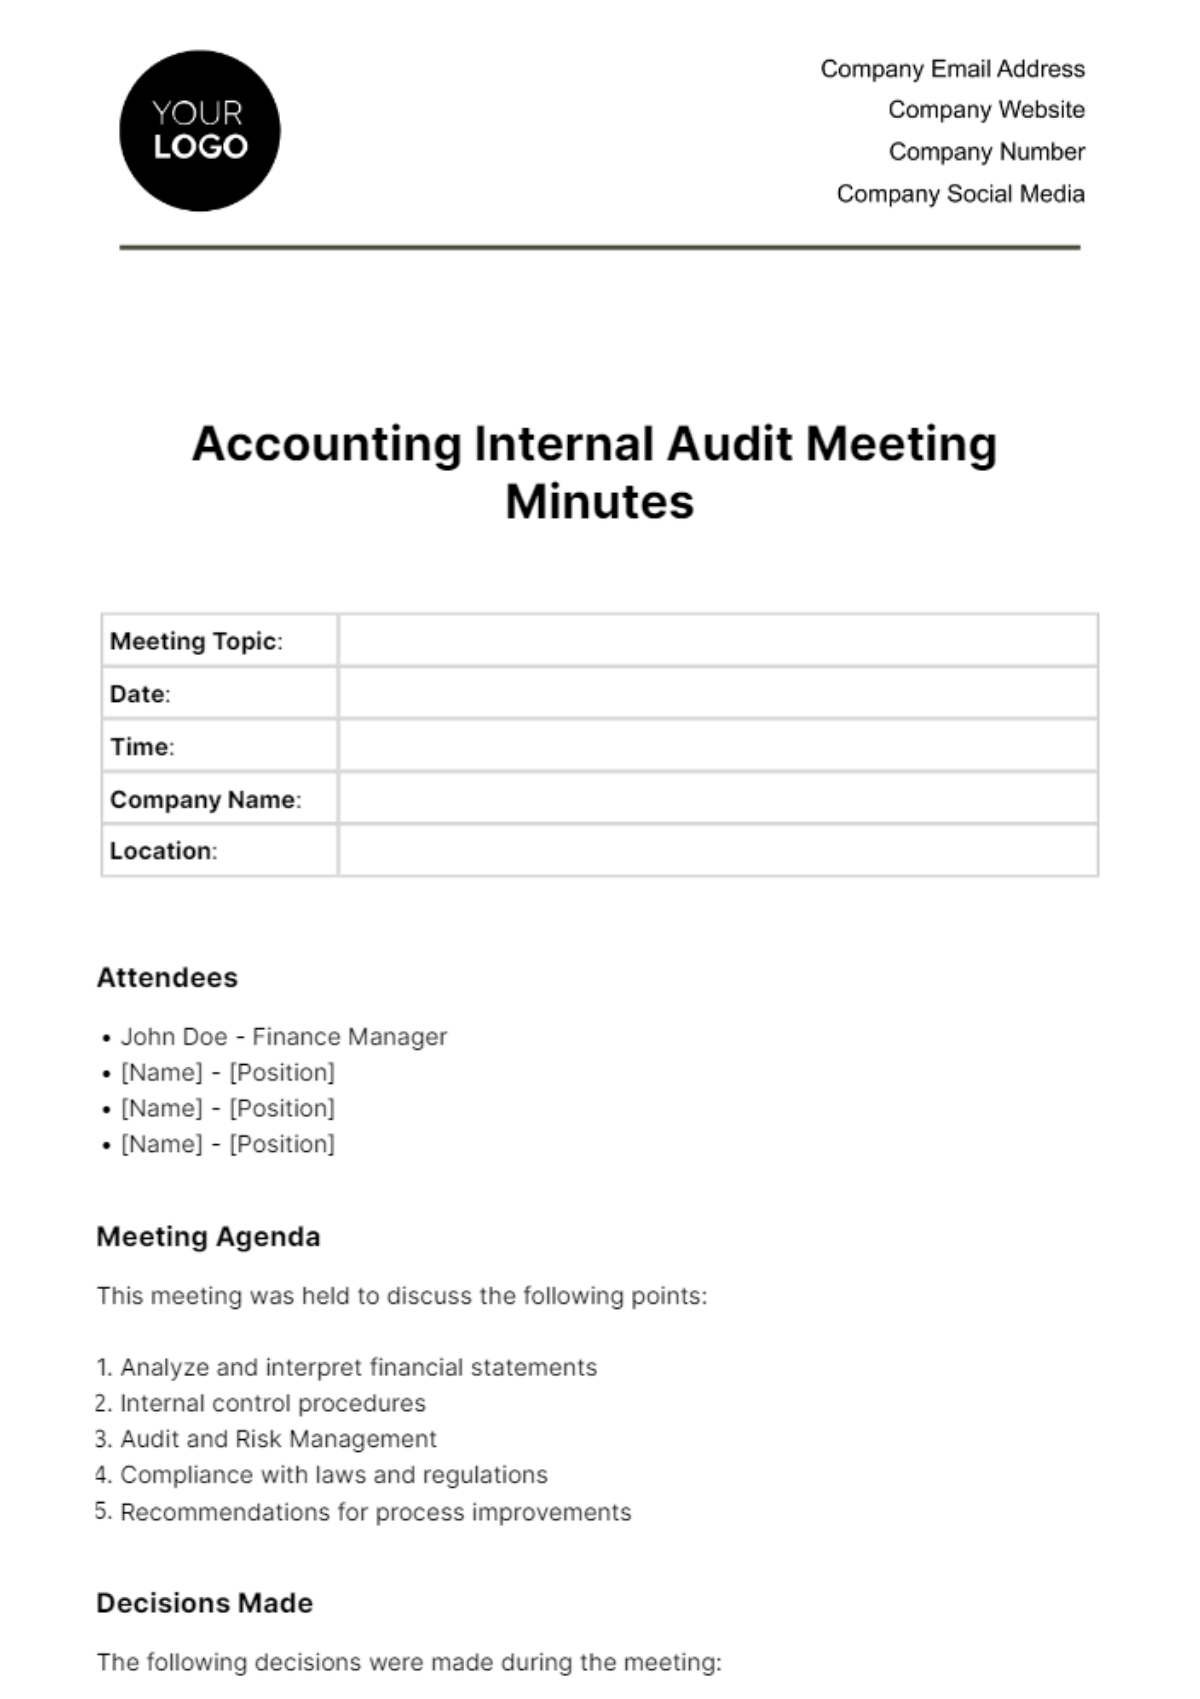 Accounting Internal Audit Meeting Minute Template